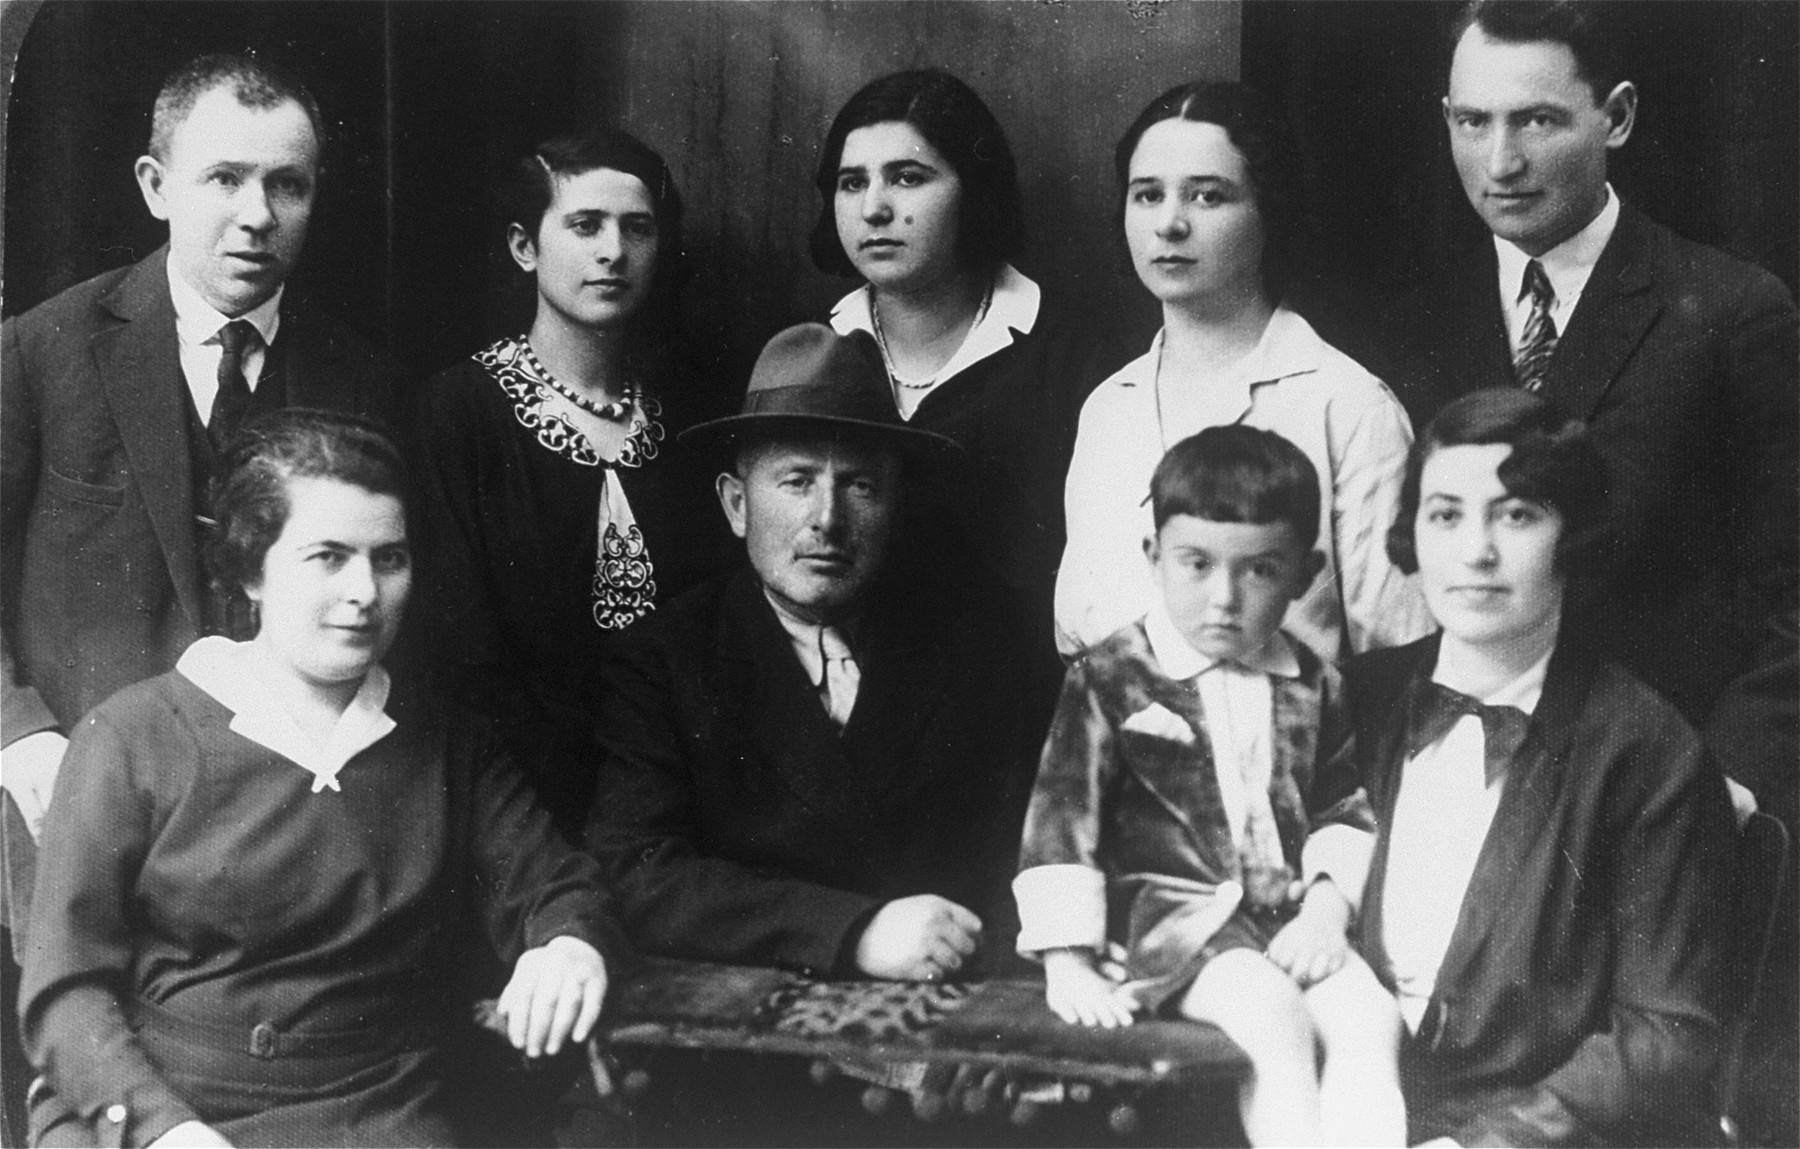 Studio portrait of members of a Jewish family in Vilna.

Pictured are members of the Rudashevsky family.  Among those pictured are: Rosa Rudashevsky (standing second from the left), her father, Zvi Yaacov Rudashevsky (front row center with hat), her sister Yona Rudashevsky (back row, second from the right), Hannah Rudashevsky (back row, center), and Eli Rudashevsky (back row, right), his wife Rosa (a second Rosa, front row, right) and son Yitzhak (front row, second from the right).